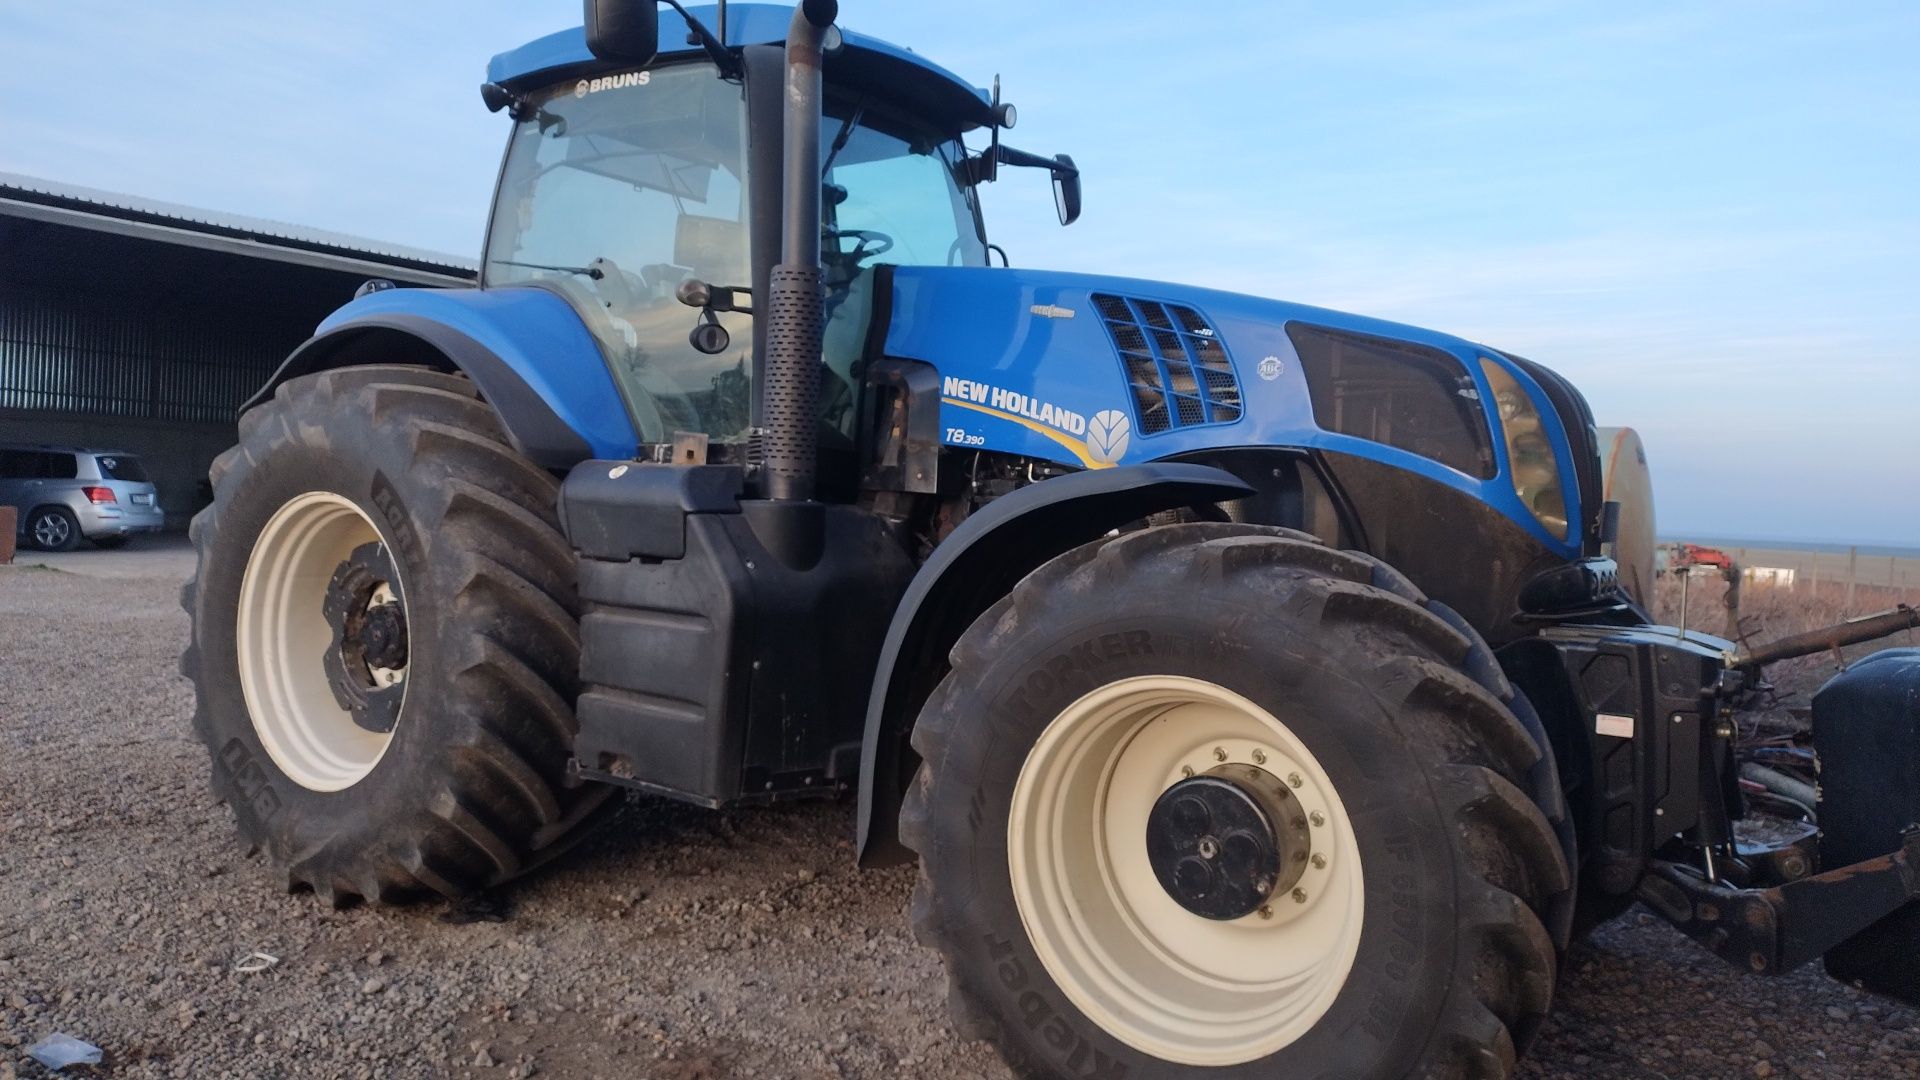 Tractor   New holland t8.390